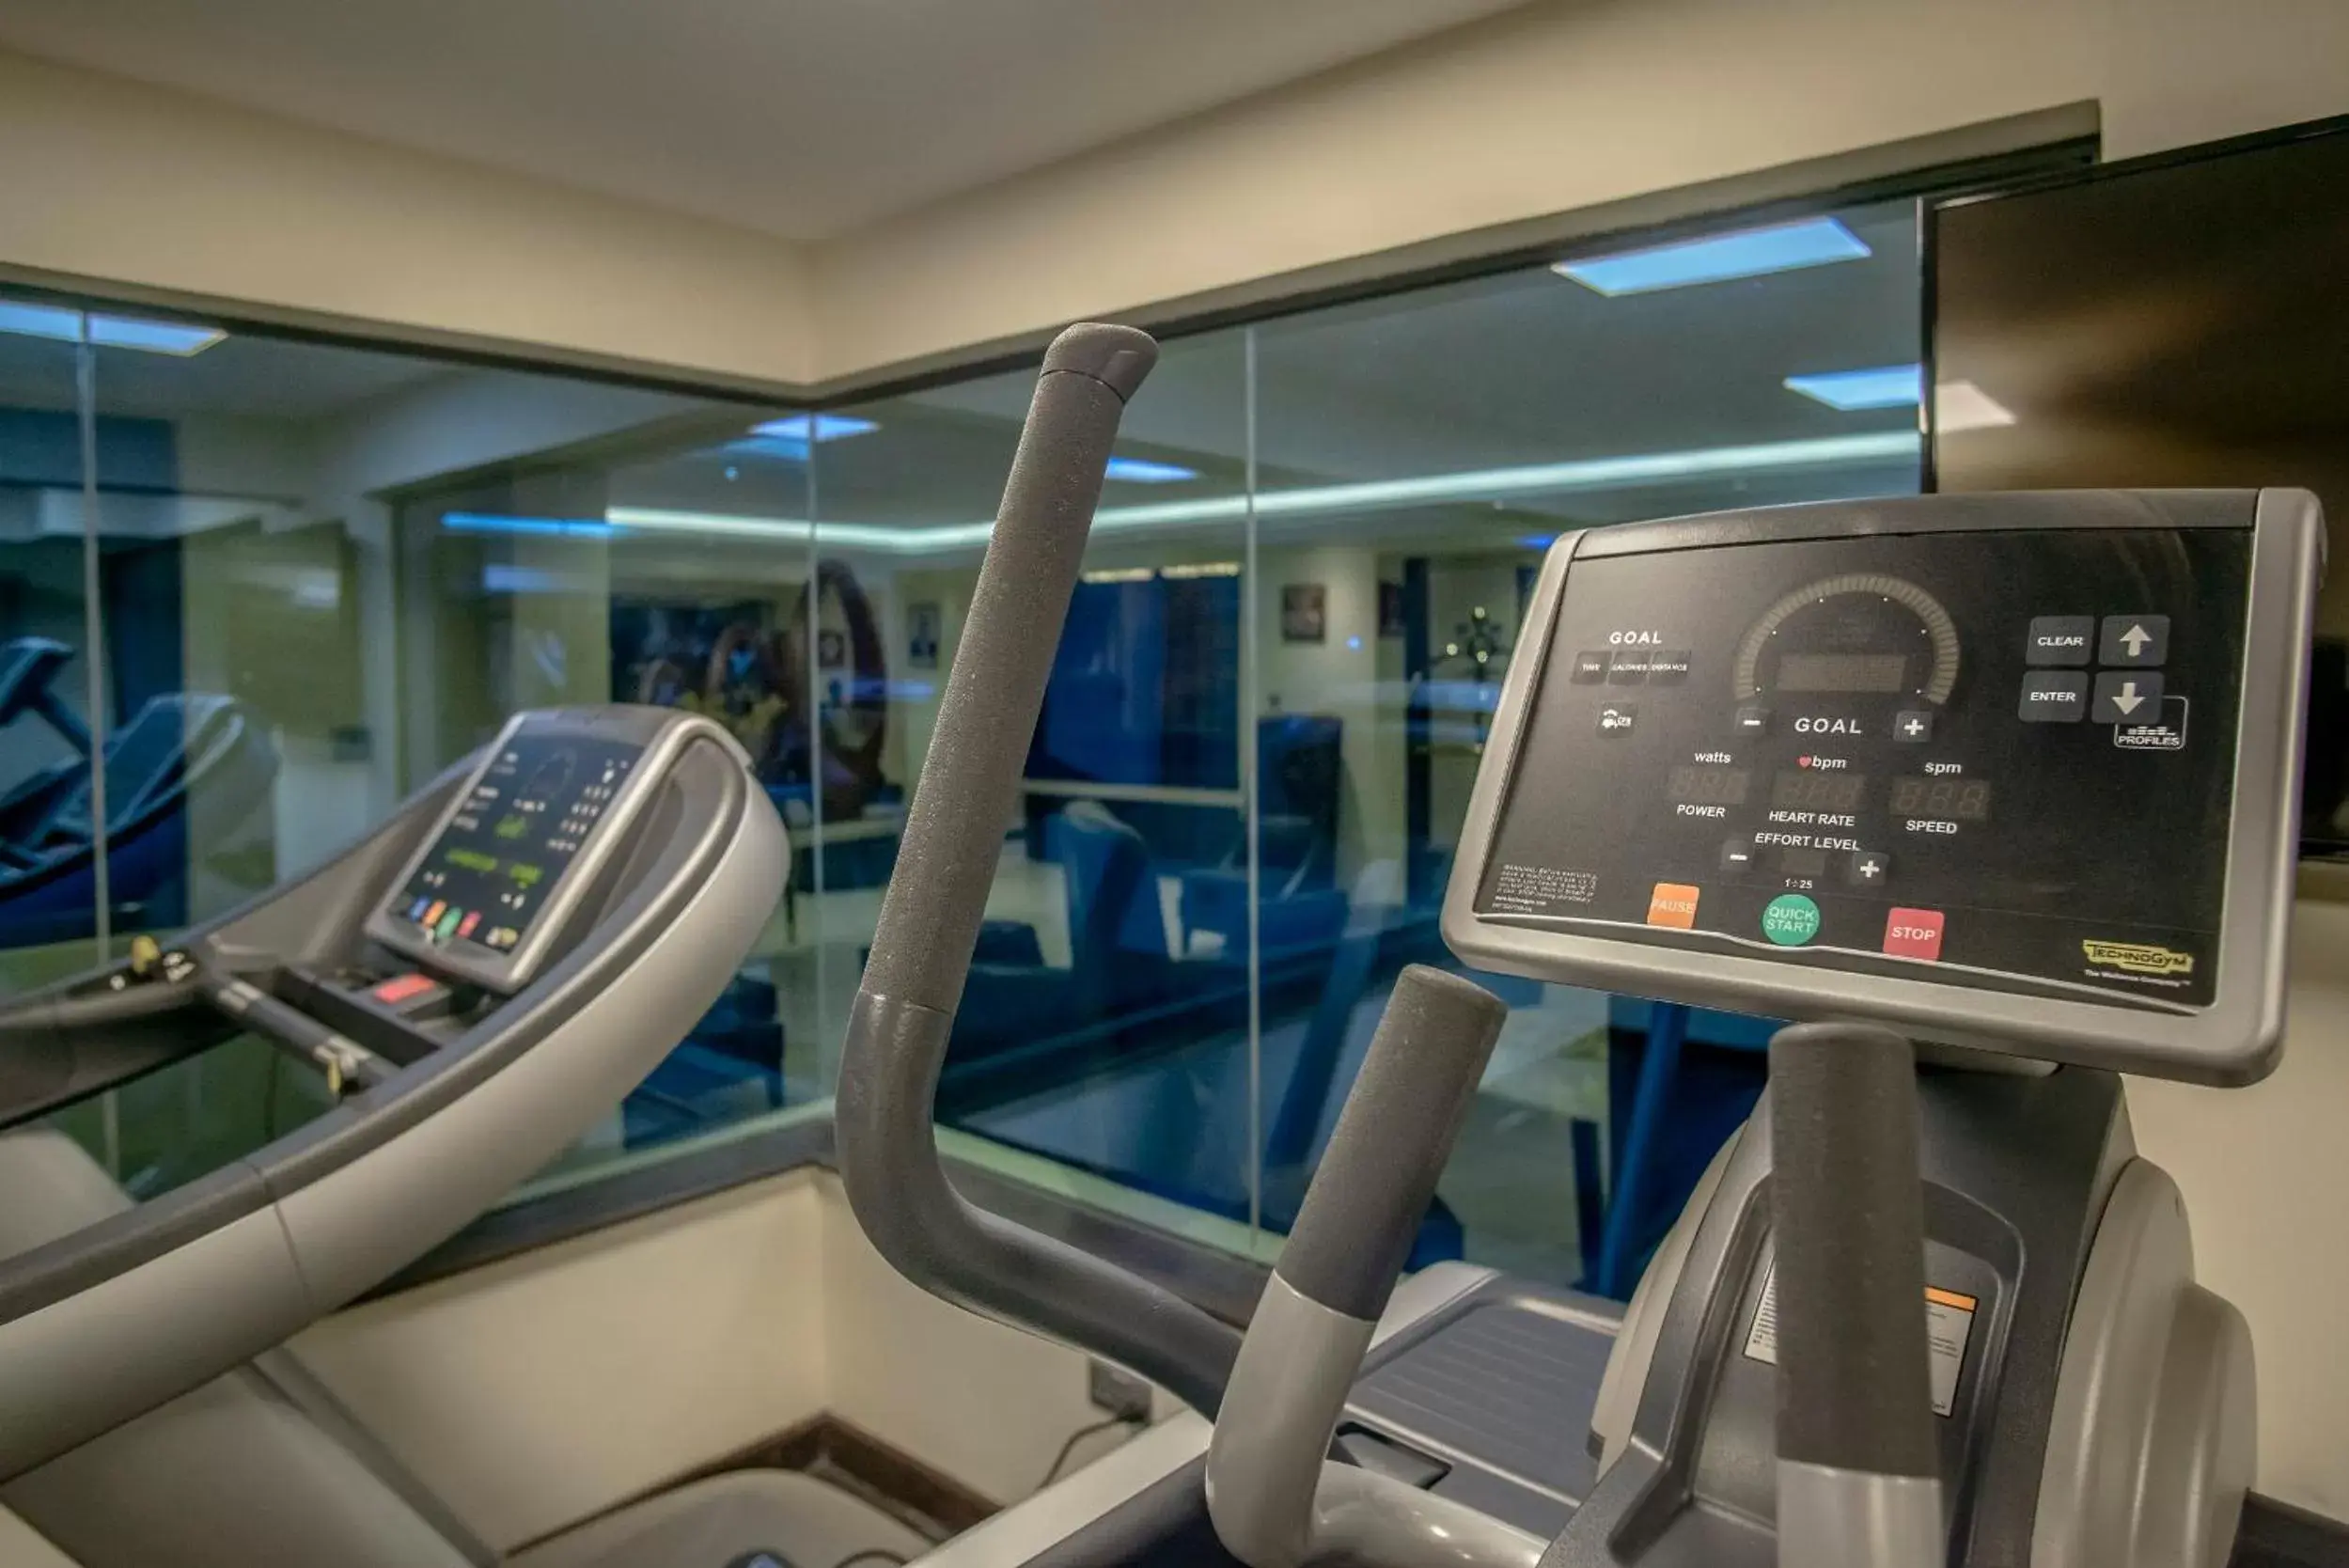 Fitness centre/facilities, Fitness Center/Facilities in The Landmark Suites